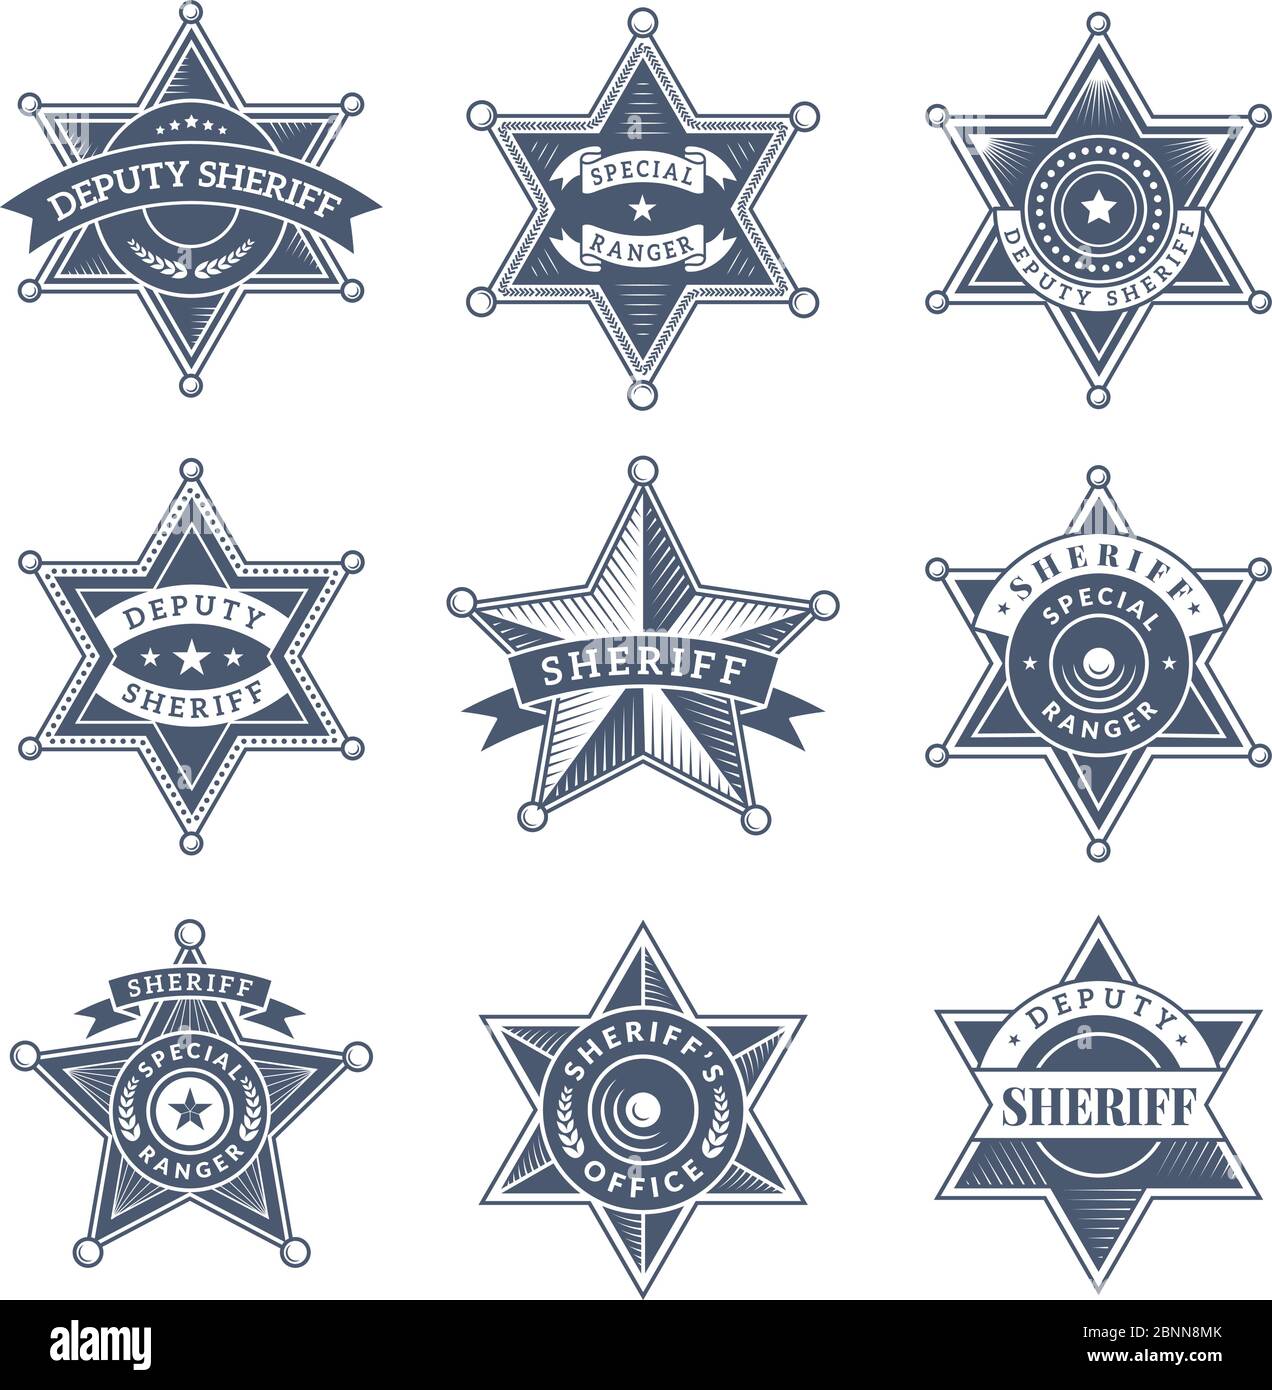 Security sheriff badges. Police shield and officers logo texas rangers vector symbols Stock Vector